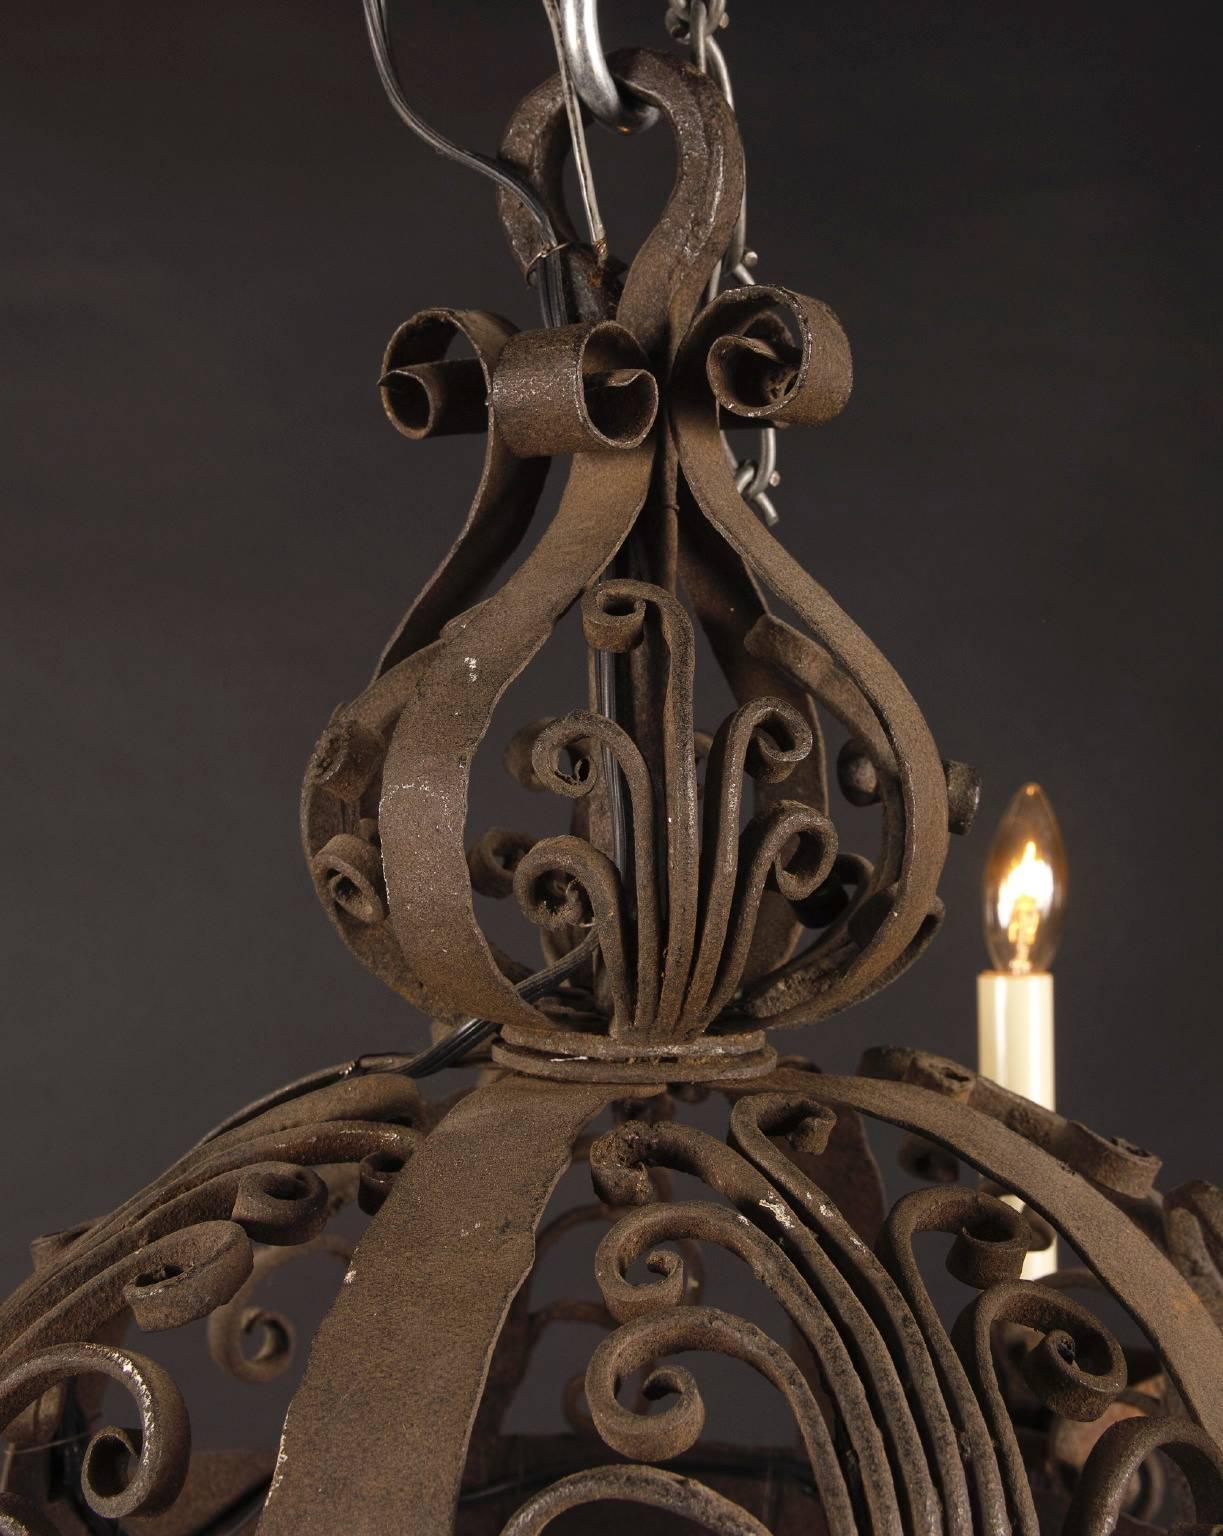 This small 18th century spherical chandelier is made from hand wrought iron circa 1780. The French antique piece features iron bobeches and floriate scroll decorations at top, with a floriate finial. It’s classically medieval in design and draped in